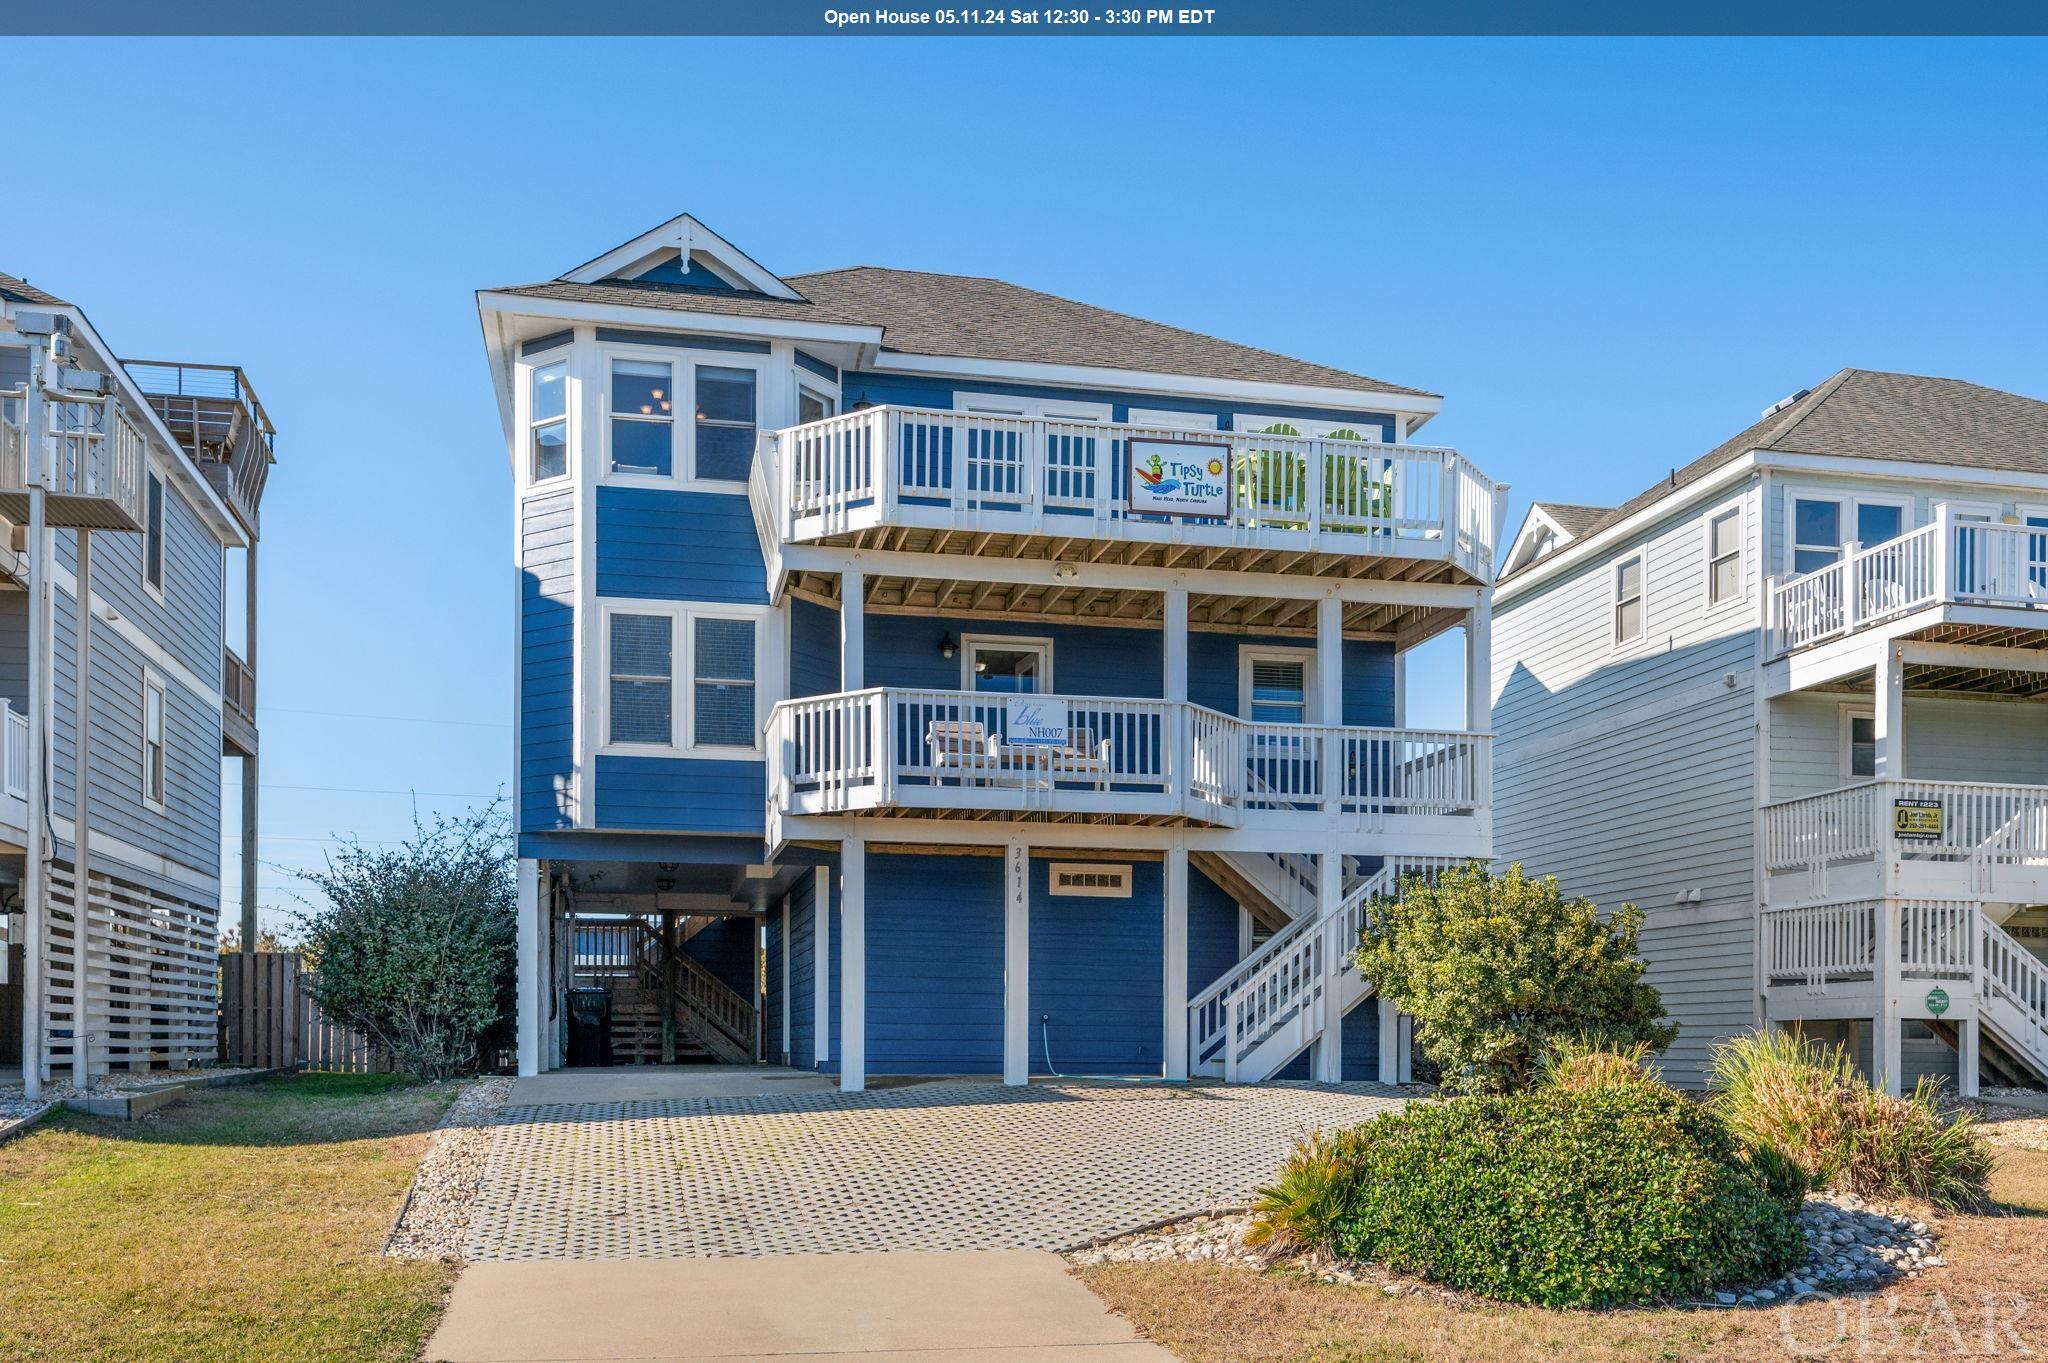 We're super excited to present this semi-oceanfront gem in the heart of Nags Head! Not only has it undergone loads of recent stylish updates and major improvements, just wait till you explore the fantastic layout of this tri-level 5 bedroom, 4 full-bath beauty that's situated less than 600 ft from the sandy shores of the Atlantic Ocean. Panoramic sunrise and sunset views are both yours for the asking! New Cali Longboard Vinyl waterproof flooring (2022) graces the top level living area with an airy, beachy vibe and open-concept design, perfect for large family gatherings. The kitchen is well appointed with stainless steel appliances and shiny new (2023) granite counter tops. You'll also find a spacious welcoming master en suite on this level, as well as an open deck to sunbathe, enjoy the sunrise and catch the salty breezes. On the mid-level are three more bedrooms (one with a private bath), a full hall bath, laundry area, plus a super comfy bonus den complete with wet bar, mini fridge, TV and access to an open oceanside deck with a new 6-person hot tub to languish in after spending a long day at the beach. There's also a covered deck on the soundside to relax and unwind while taking in a beautiful Outer Banks sunset. On the ground level is a bunk room, full bath and a rec room outfitted with a pool table, refrigerator as well as a card/board game table and access to the outdoor pool and living area which includes a volleyball court, grilling (both gas and charcoal) spot and convenient outdoor shower. Each level of this home is designed specifically for you and your guests to either gather together or spread out. The Nags Head multi-use path is practically right at your doorstep, inviting short walks to Nags Head Pier, great restaurants and shopping and Jockey's Ridge State Park. So many attractions are close by! Set up your showing now to tour this perfect beach retreat and enjoy classic OBX living!-See Brokers Notes for full list of improvements. Copy and paste to browser for virtual tour https://unbranded.youriguide.com/3614_s_virginia_dare_trail_nags_head_nc/